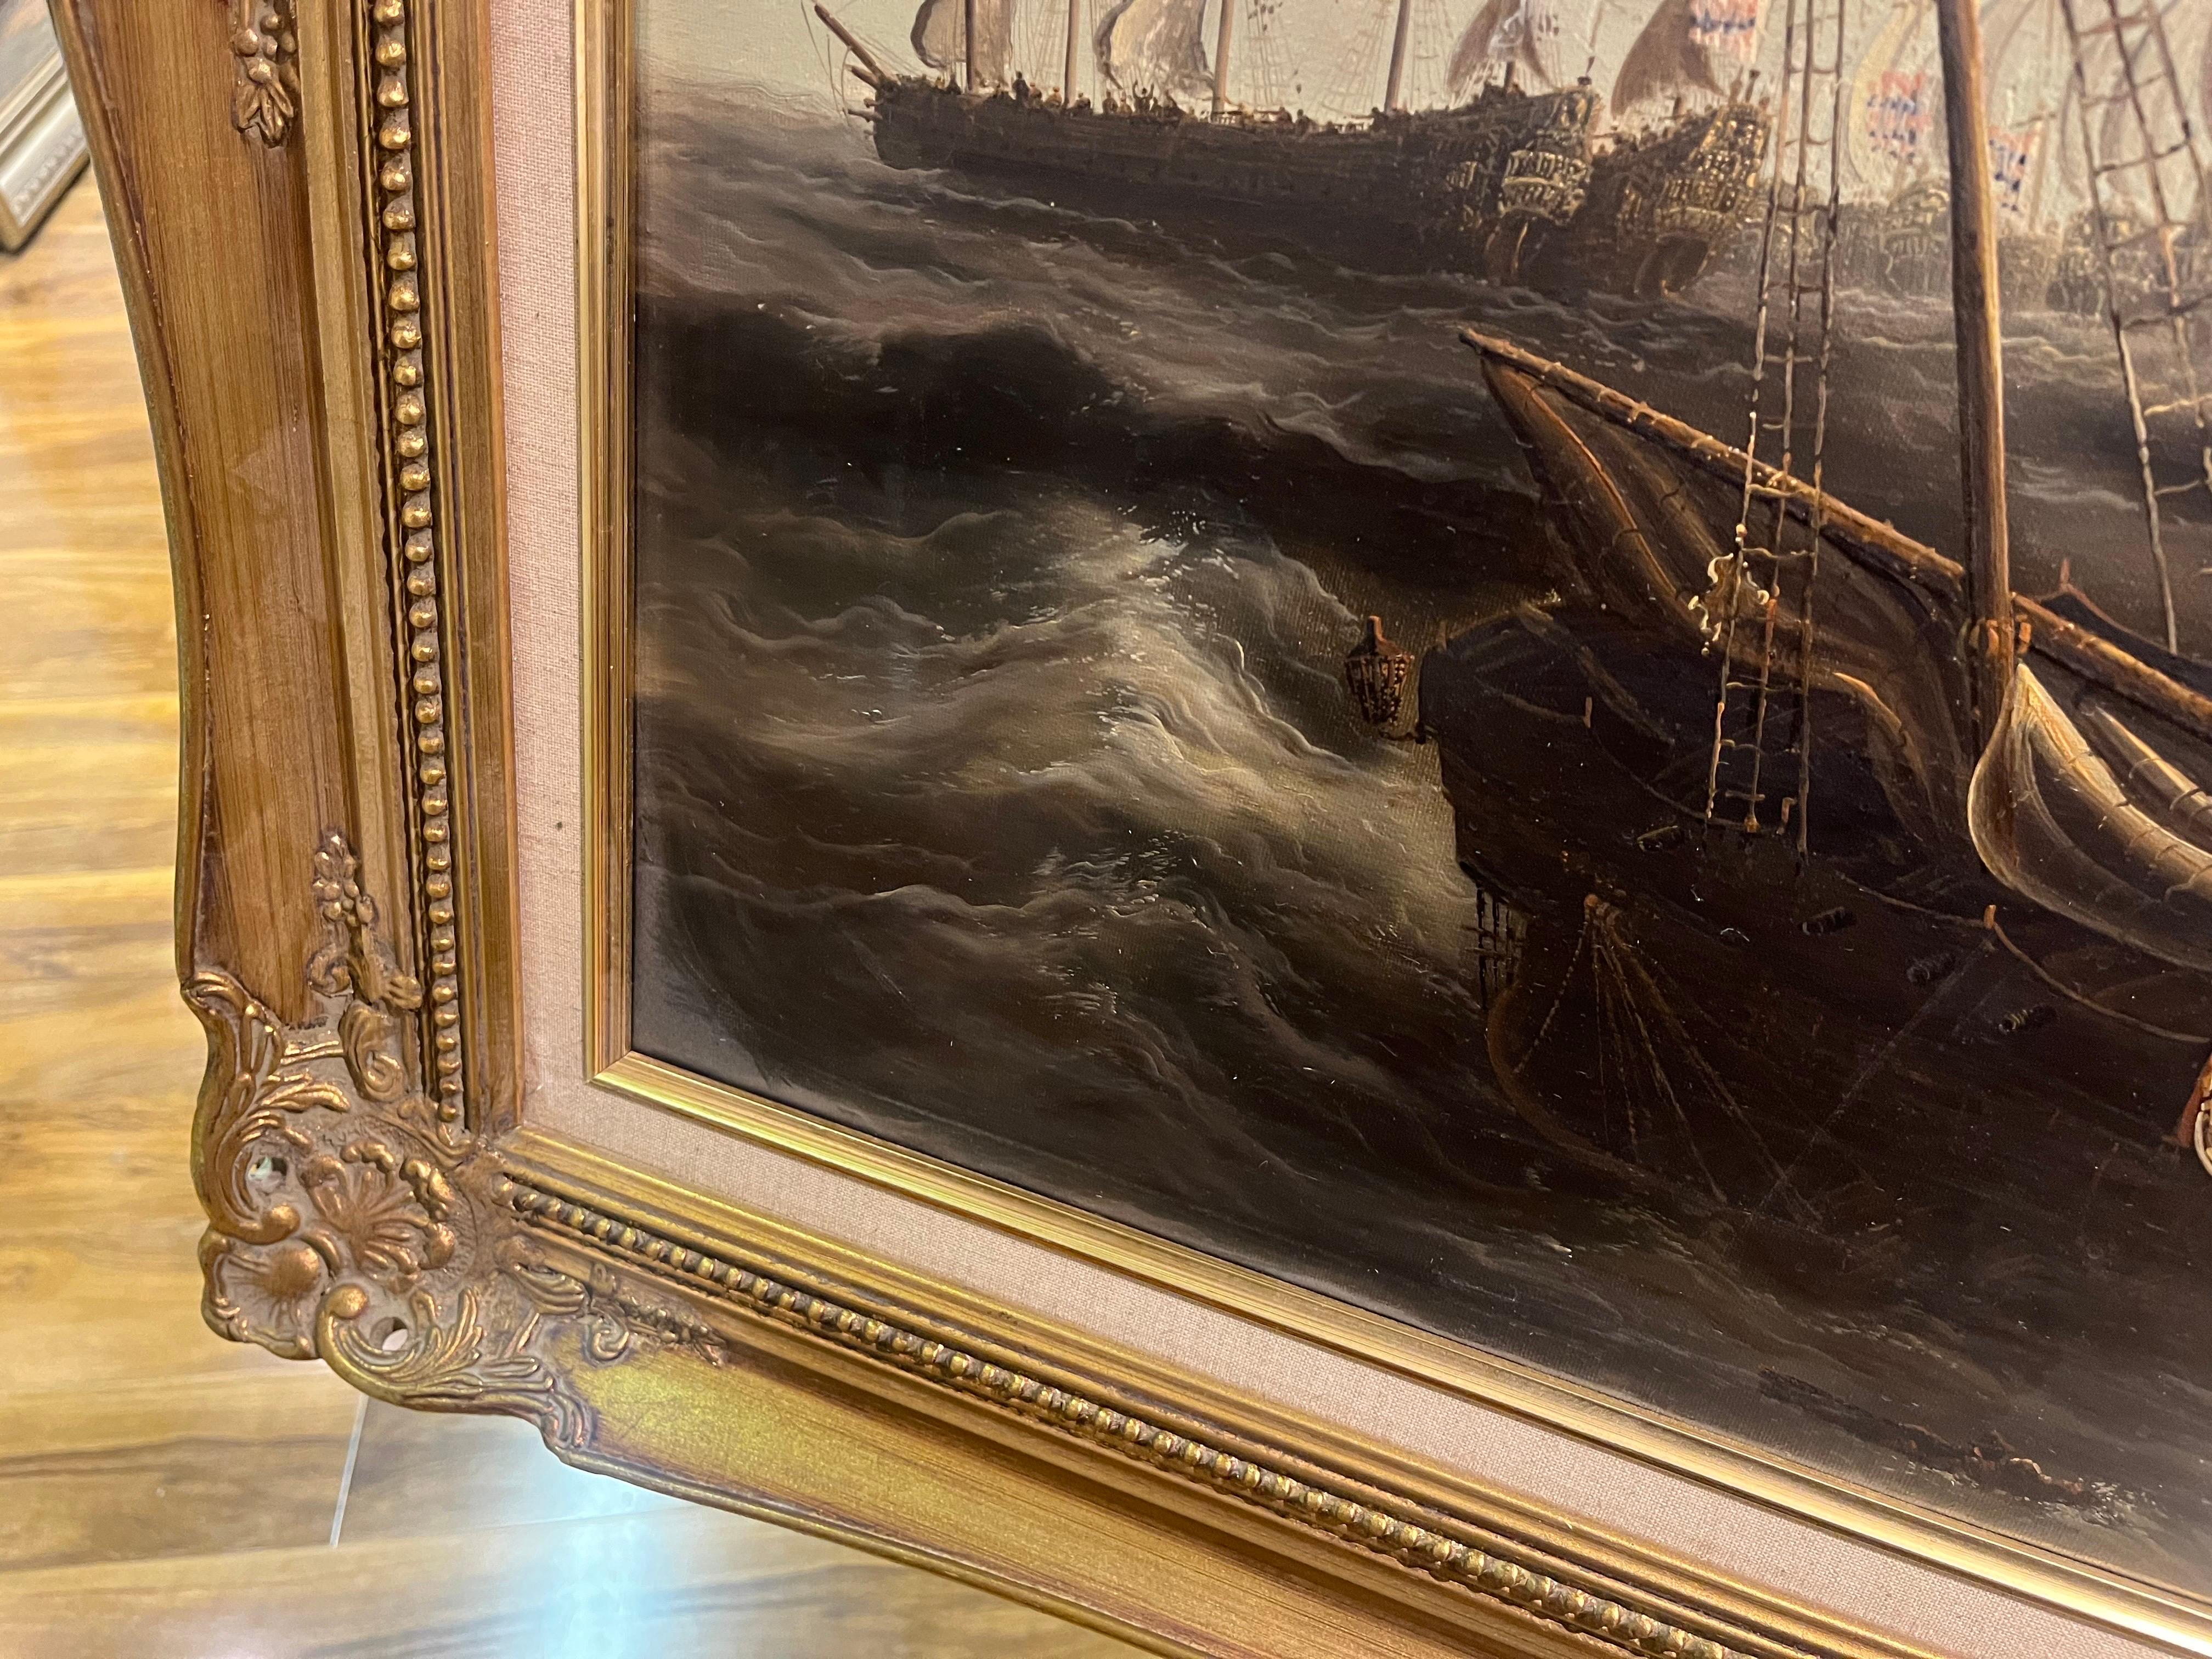 HUGE OIL PAINTING MARITIME SHIP MASTER PIECE 20th CENTURY

FINE RARE MARTINE PAINTING ORIGINAL

20th Century OLD MASTER STYLE OIL PAINTING GOLD GILT FRAME

By Similar $10,000 Premier Collection

NEW COLLECTION Of RARE PIECES OF OLD HISTORY

Good